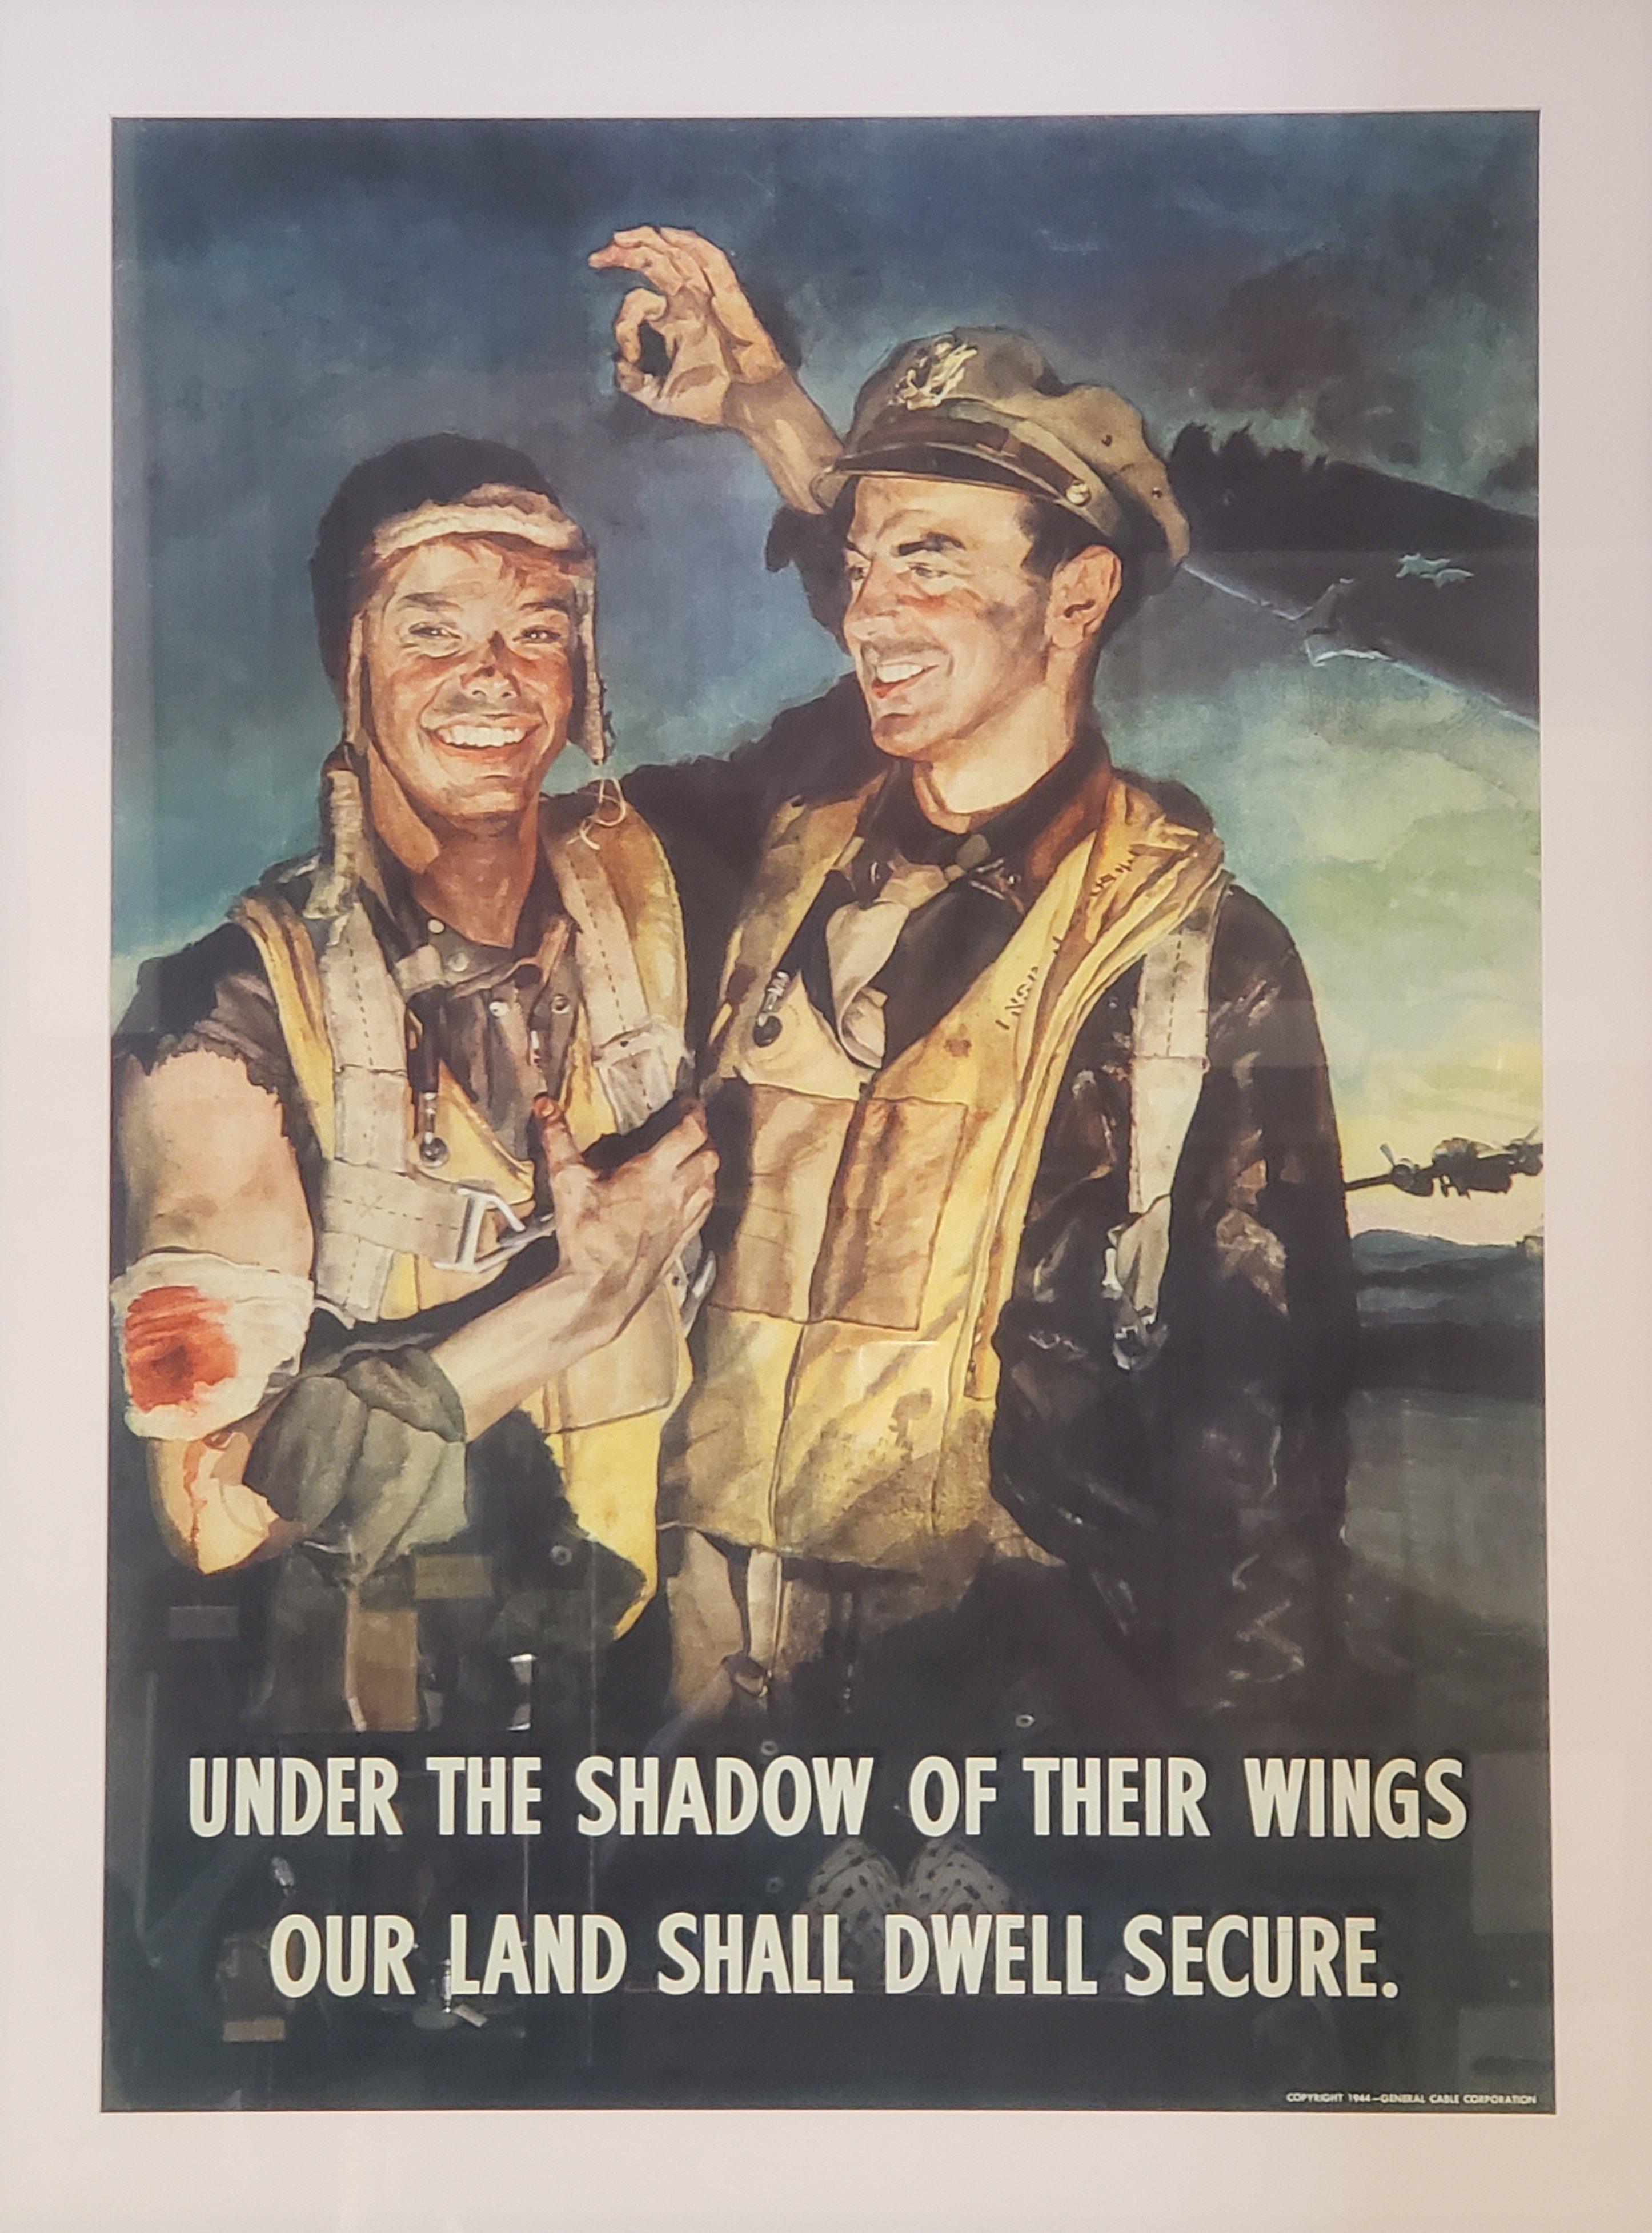 This is an original World War II era poster, produced in circa 1944. The poster was released by General Cable as part of the famous 